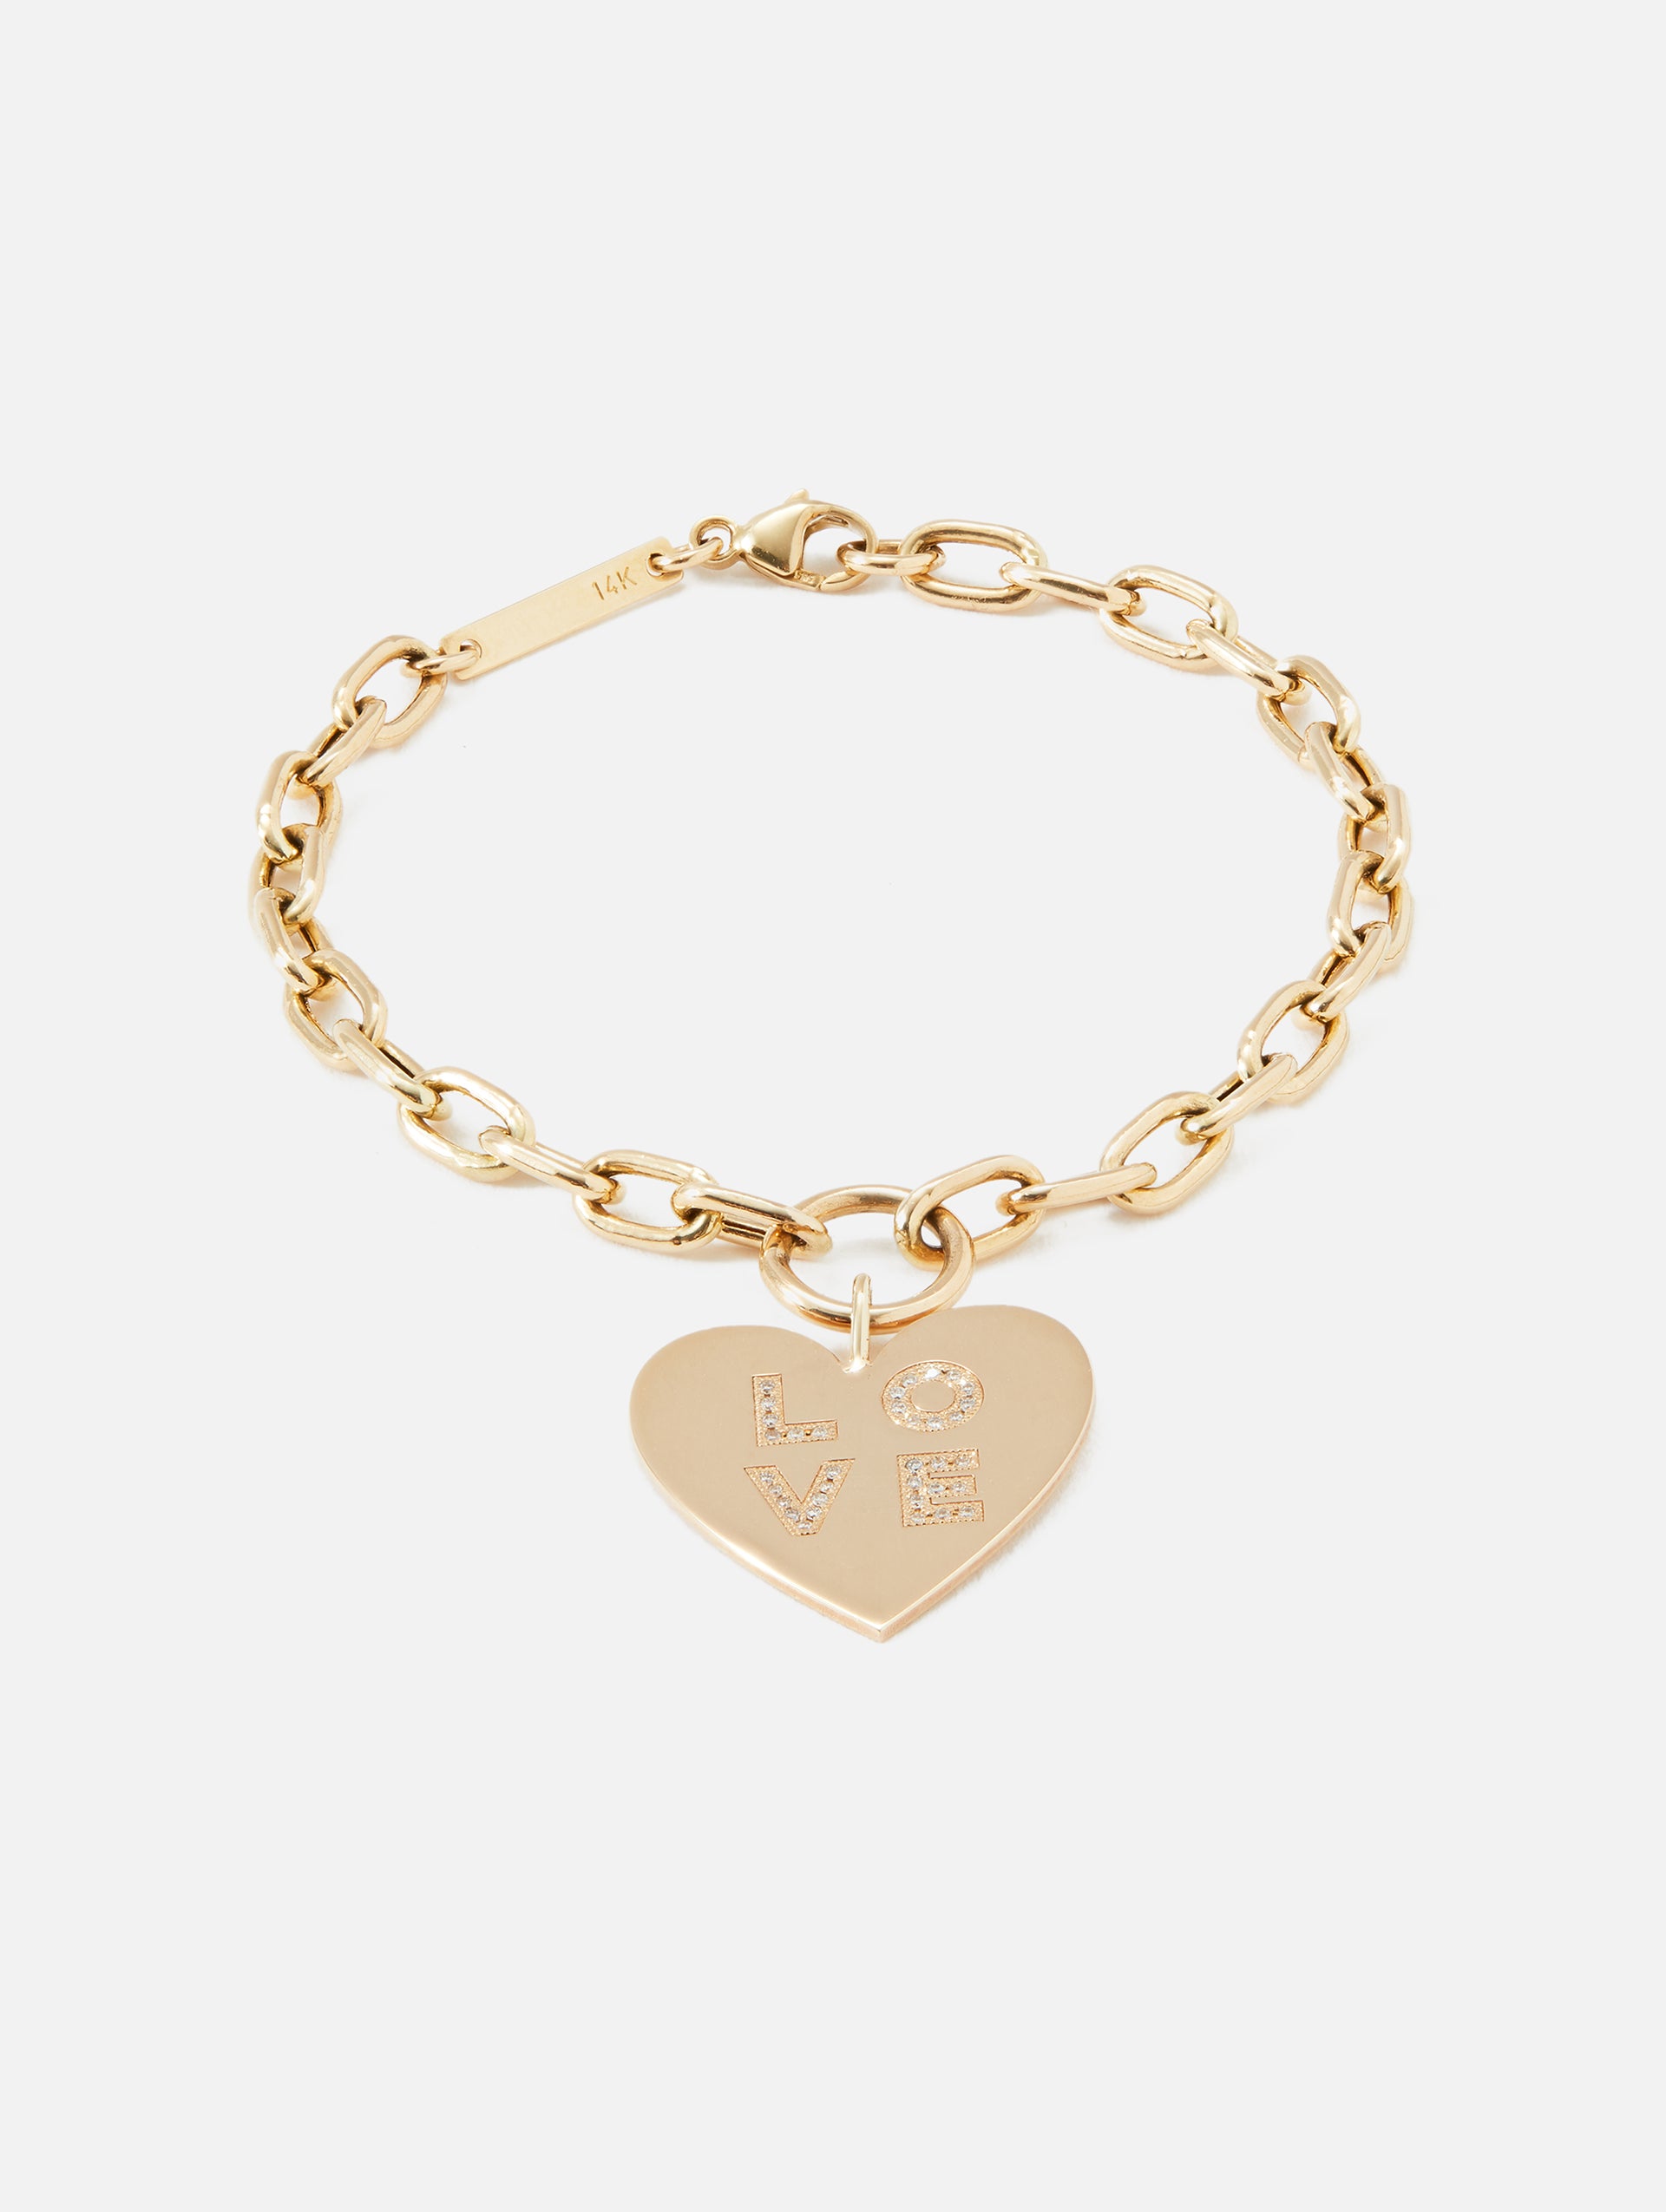 Rose Gold Vermeil Paper Clip Bracelet - With Engraved Rose Gold Heart Charm  - The Perfect Keepsake Gift